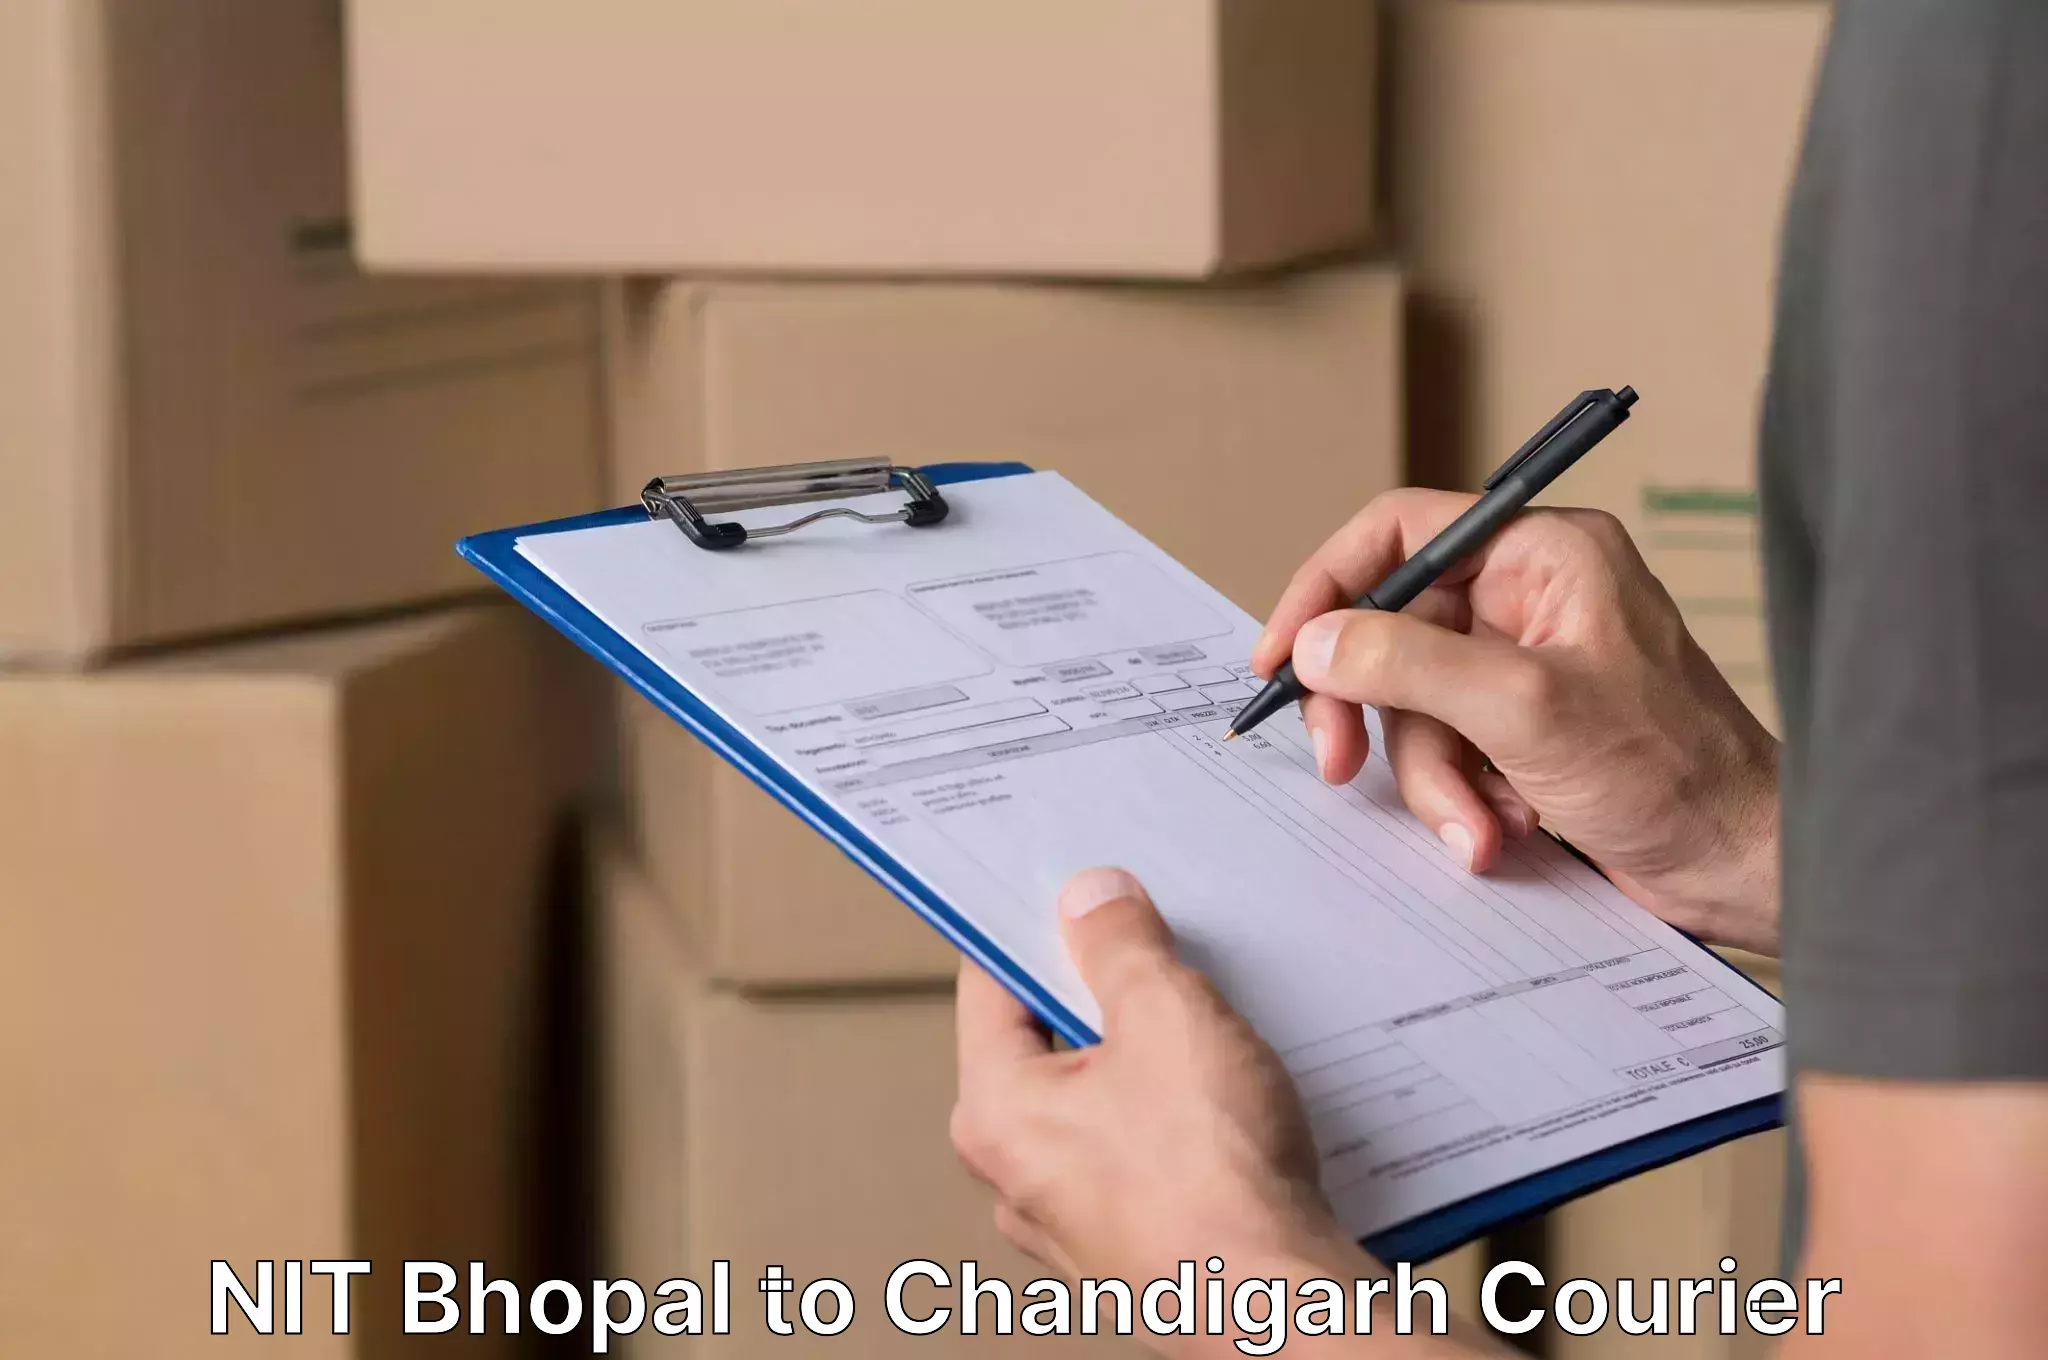 Trusted relocation experts NIT Bhopal to Chandigarh